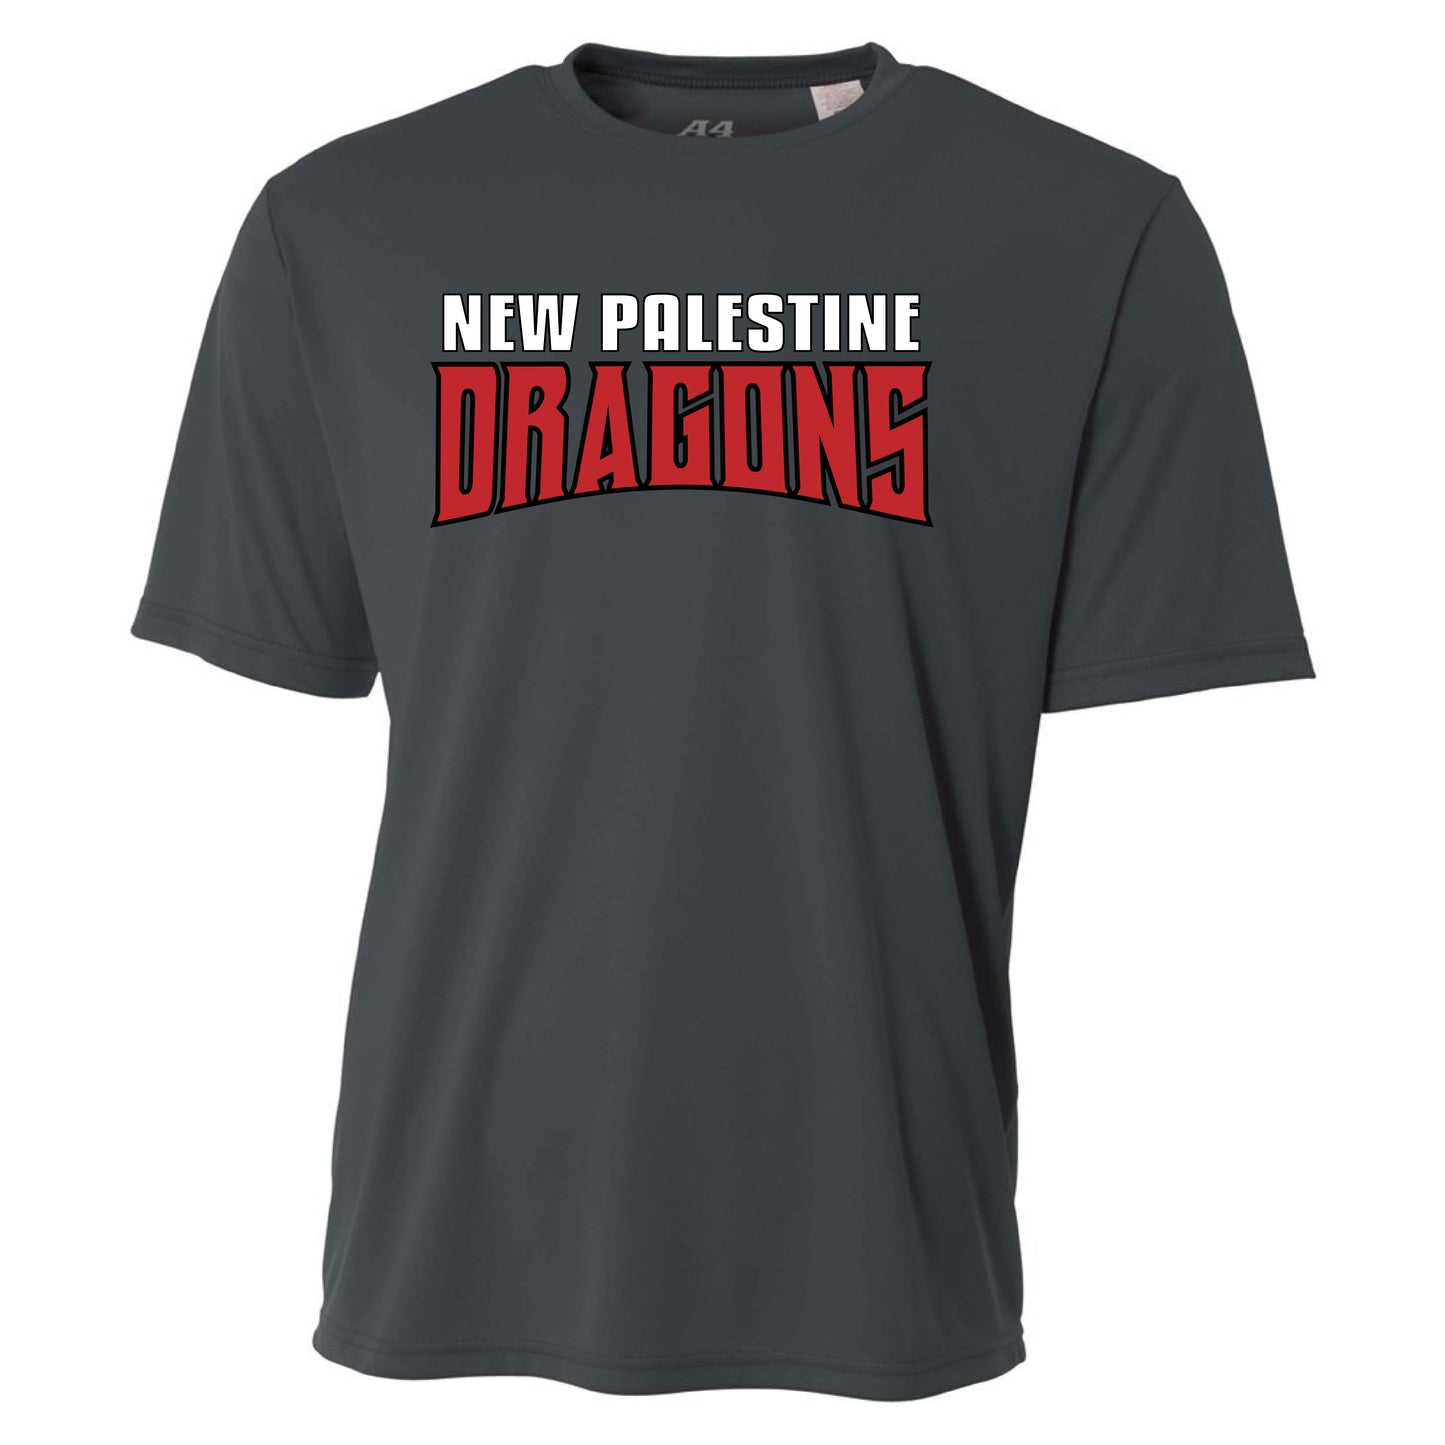 Youth S/S T-Shirt - New Palestine Dragons